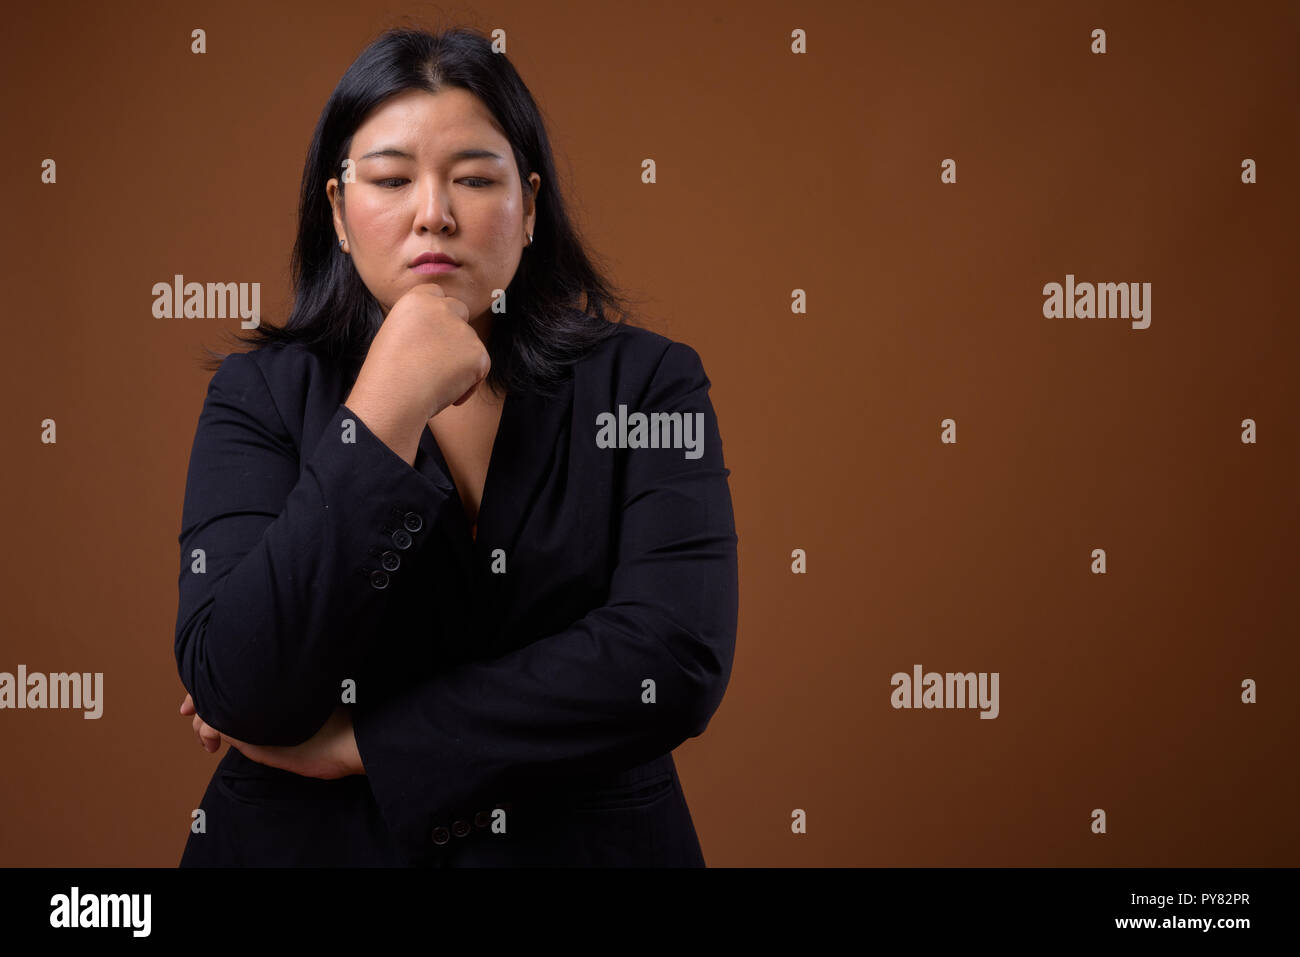 Stressed overweight Asian businesswoman thinking and looking down Stock Photo